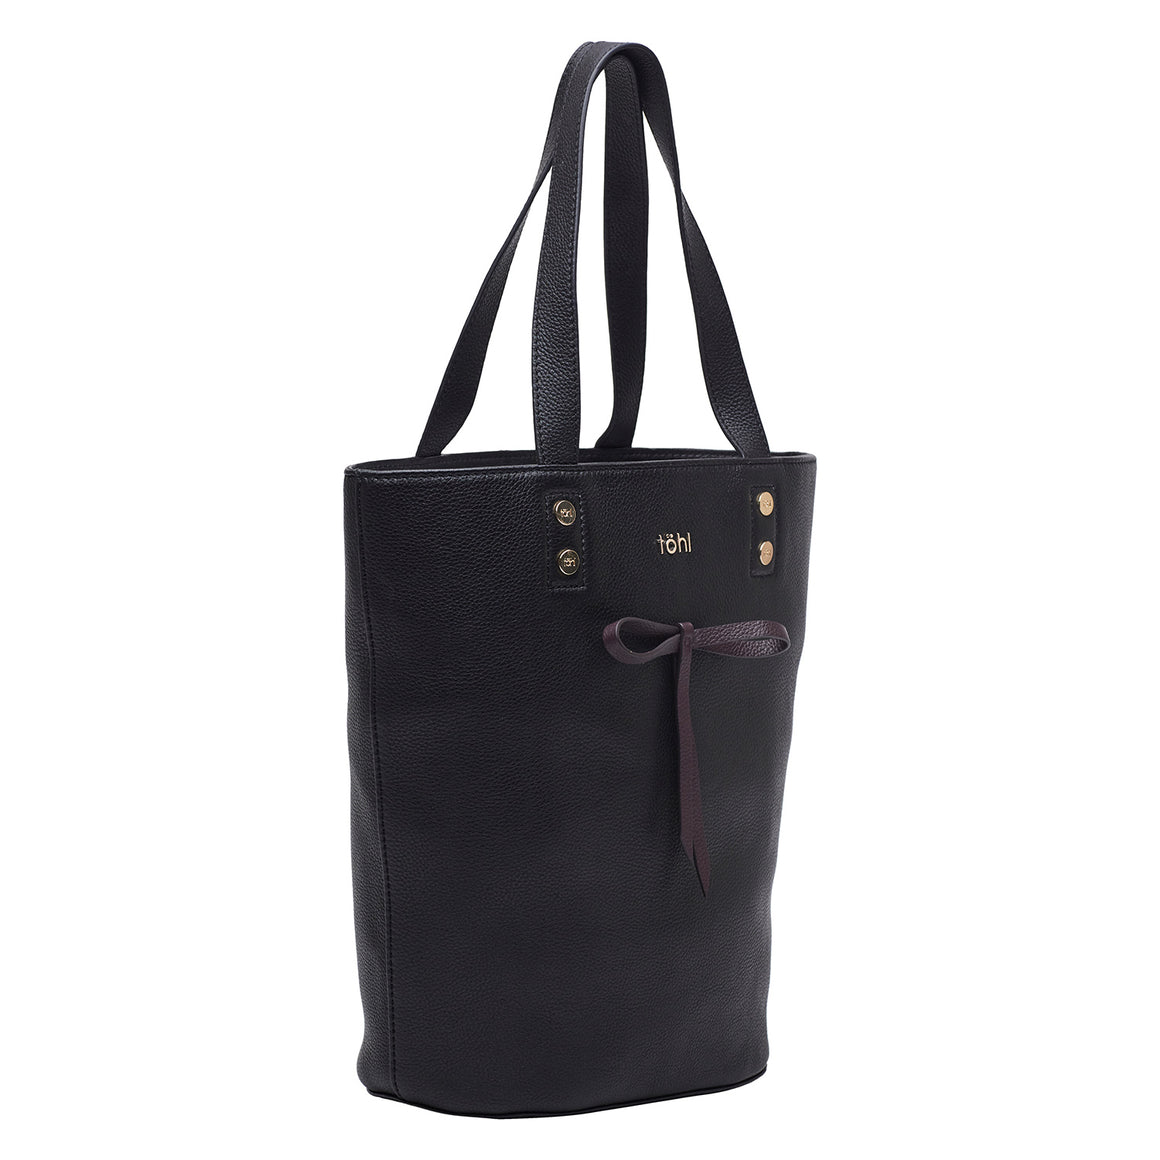 RUSSELL WOMEN'S TOTE BAG - CHARCOAL BLACK